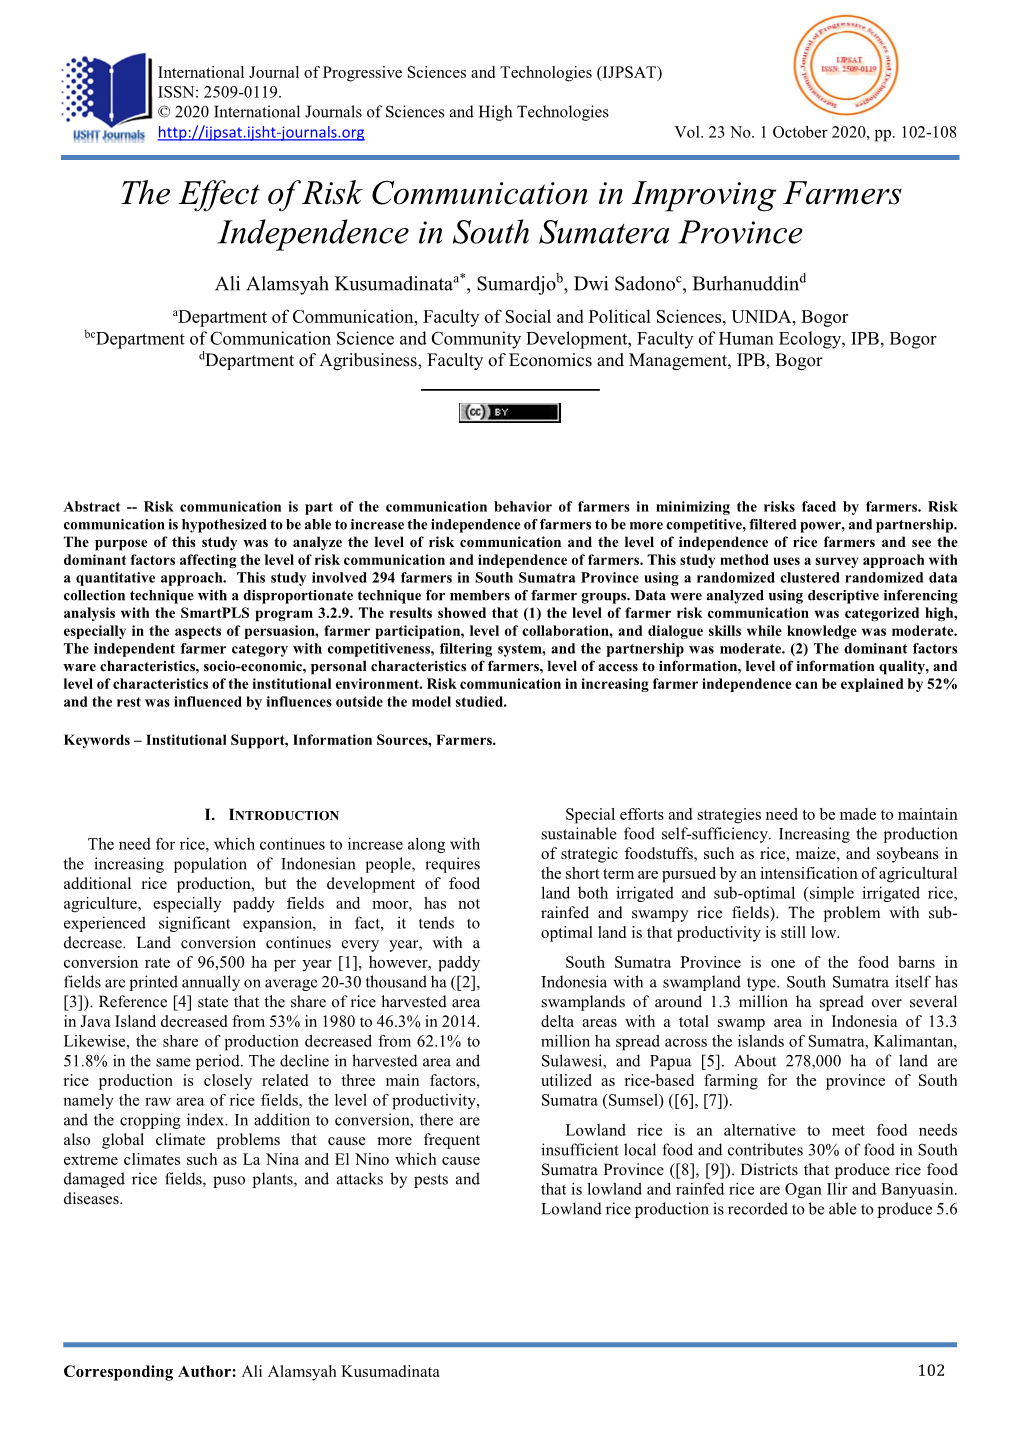 The Effect of Risk Communication in Improving Farmers Independence in South Sumatera Province